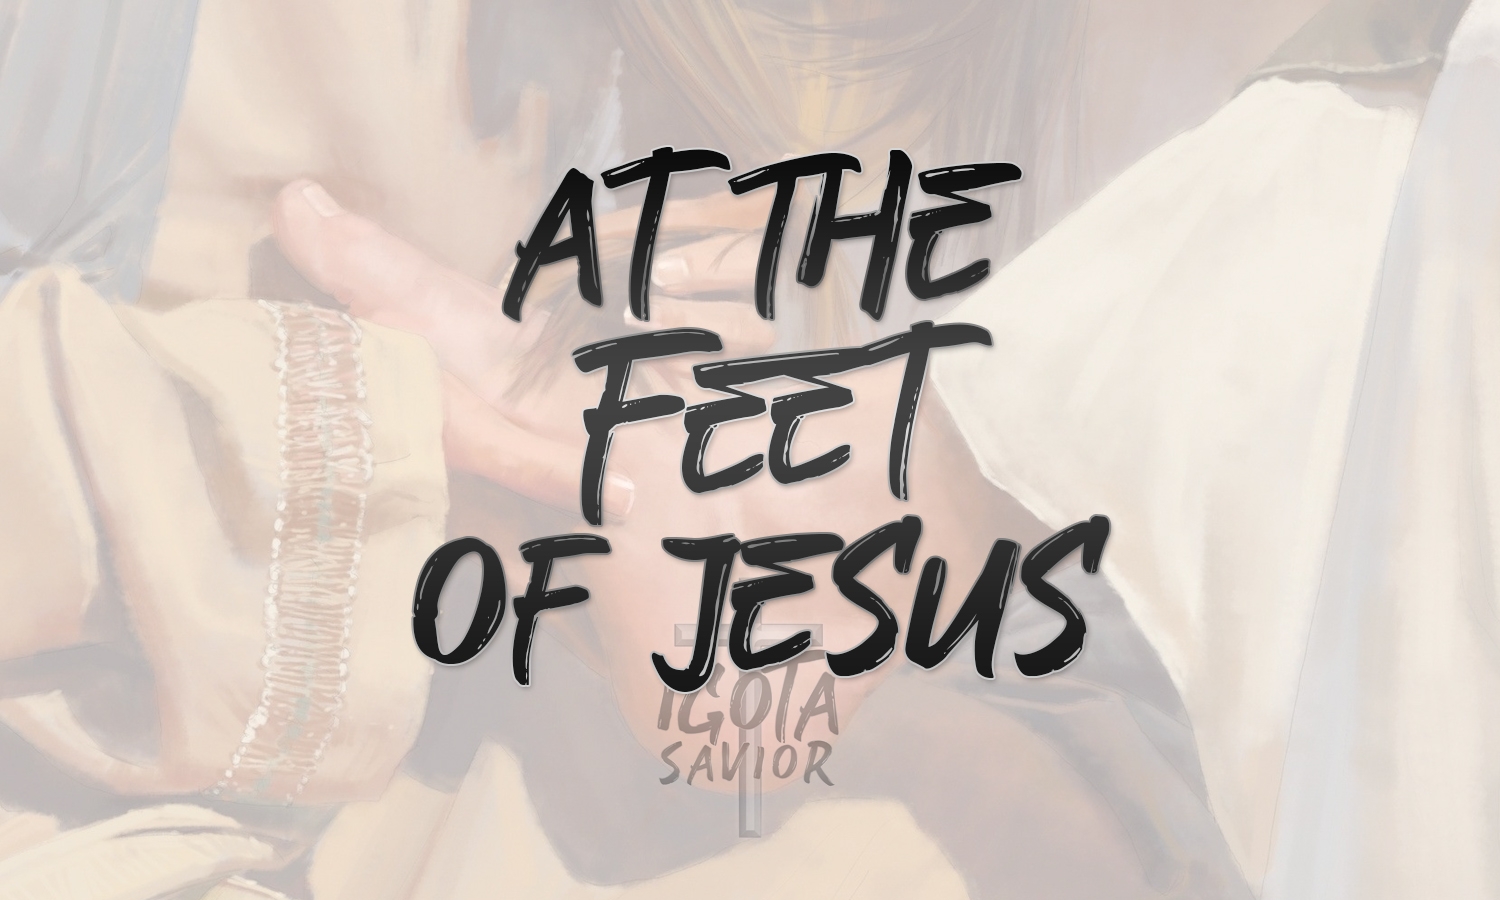 At The Feet Of Jesus